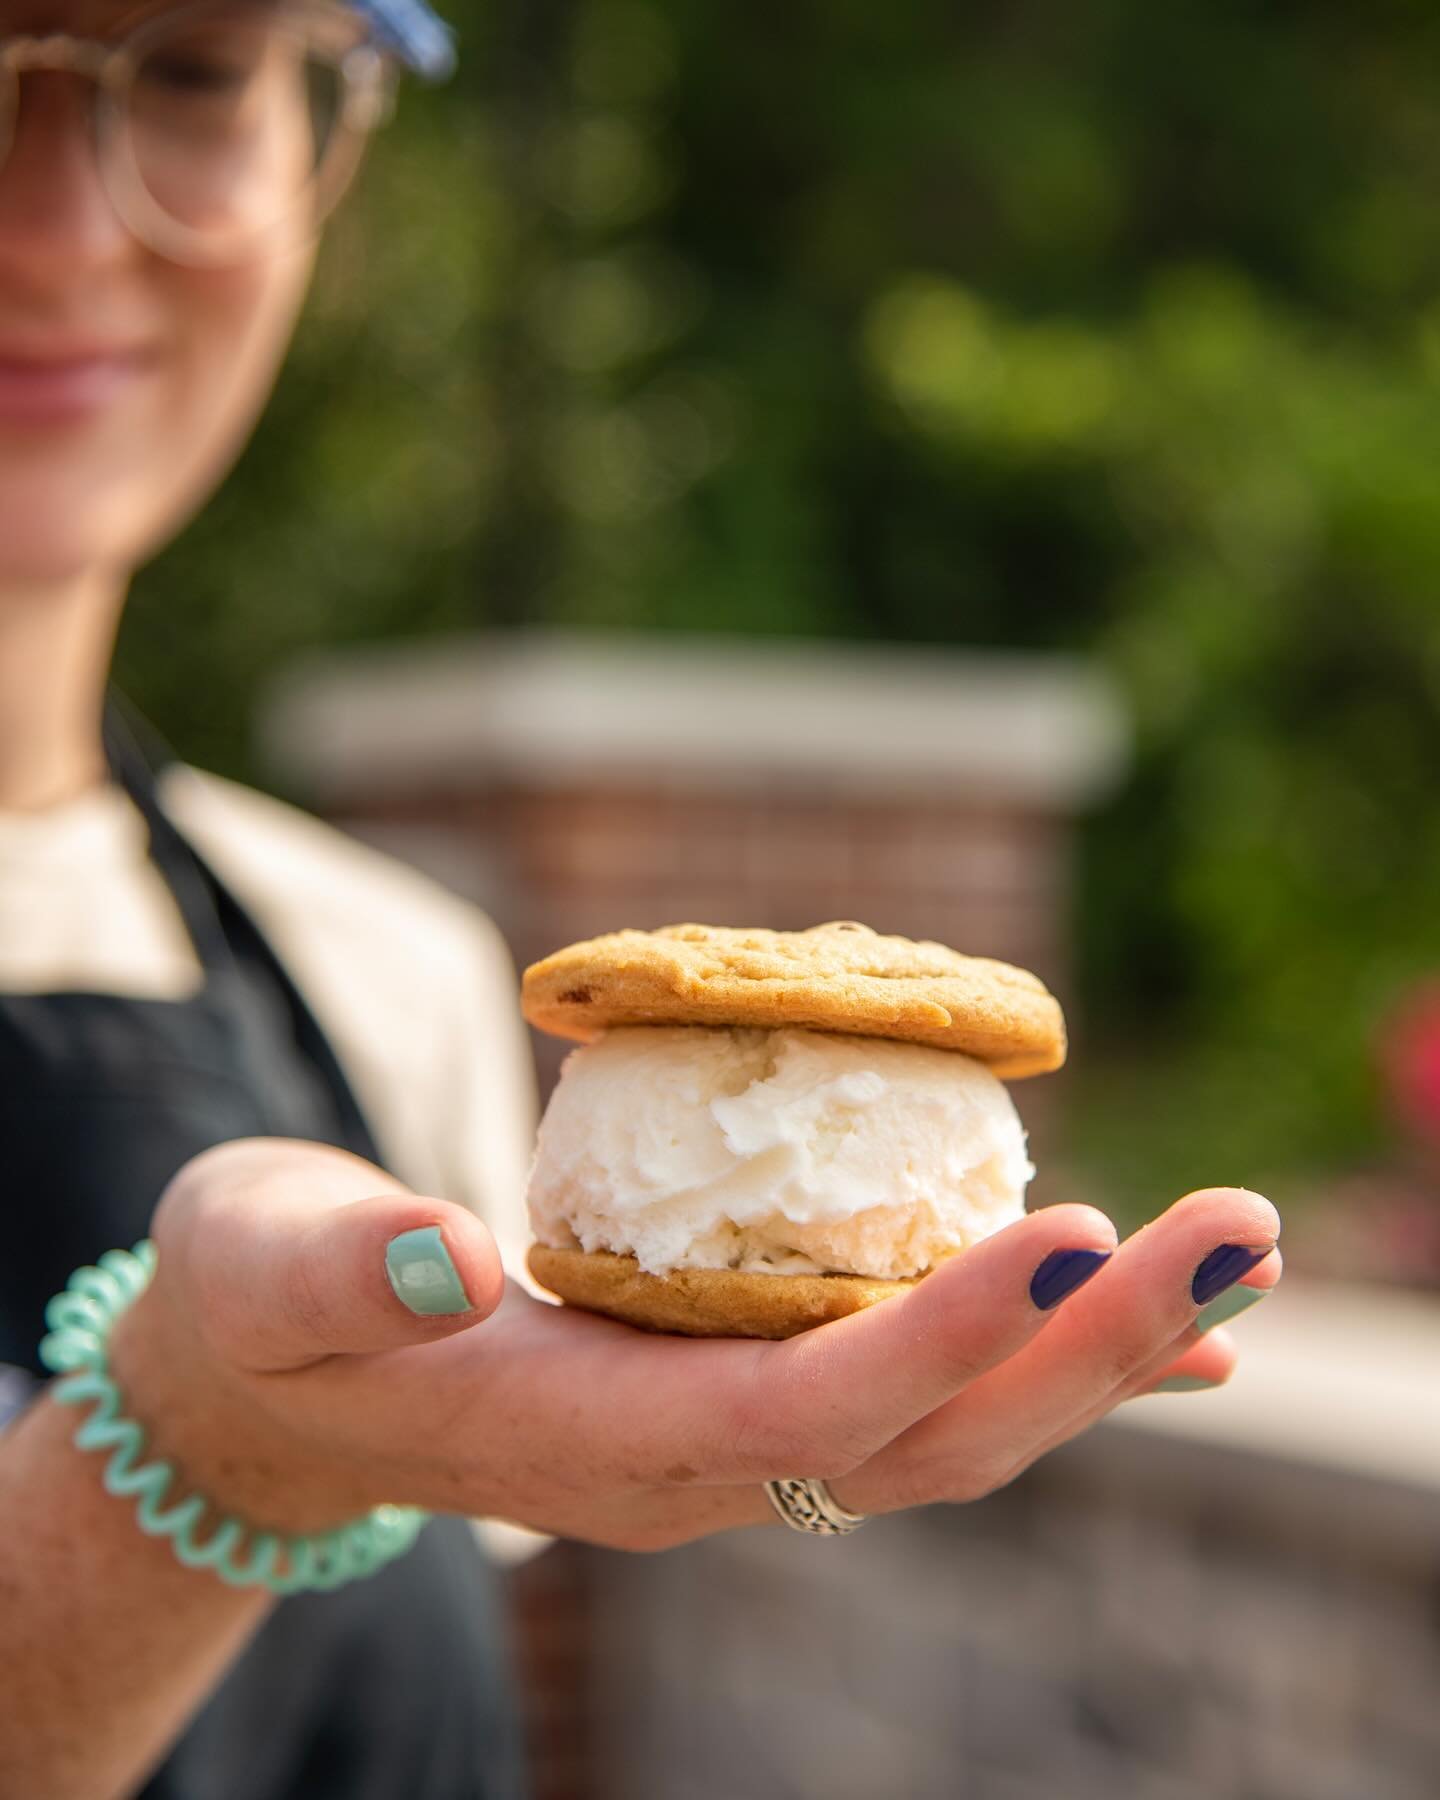 We started making these again. #icecreamsandwiches #perfectday #whosthat #chocolatechipcookies